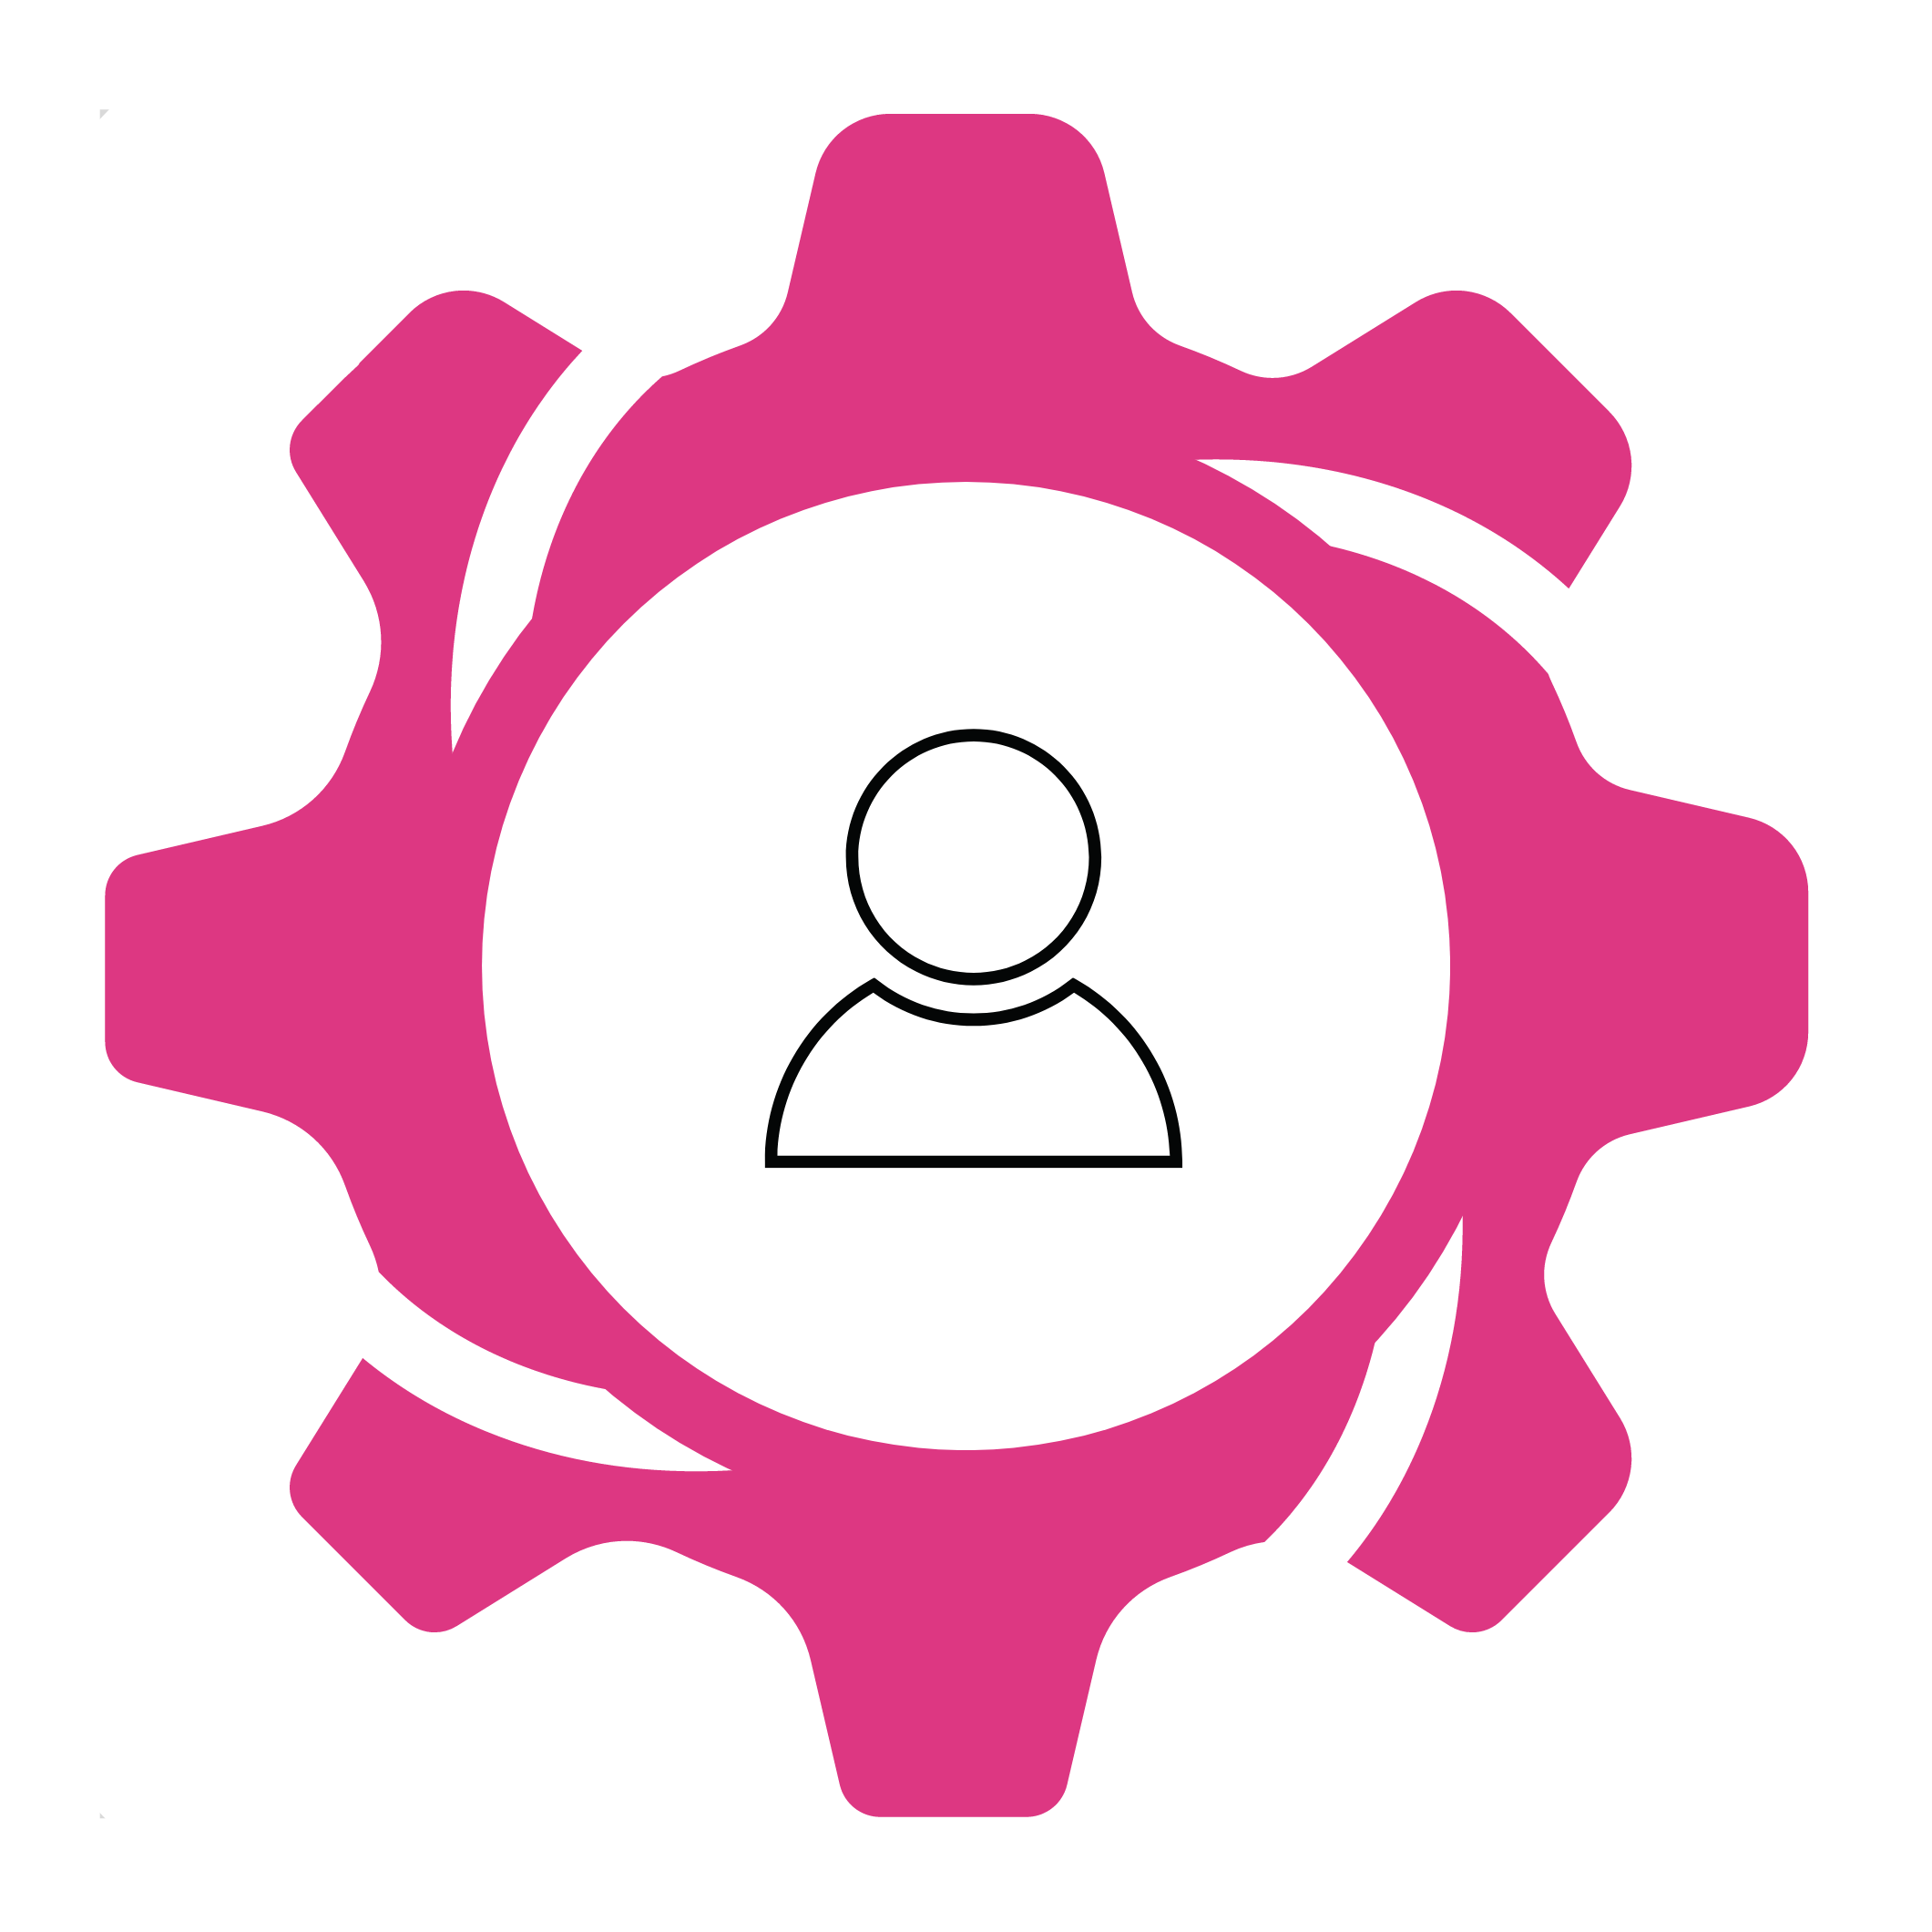 New style cog icon with a single person representing Generate, providing support for individuals.